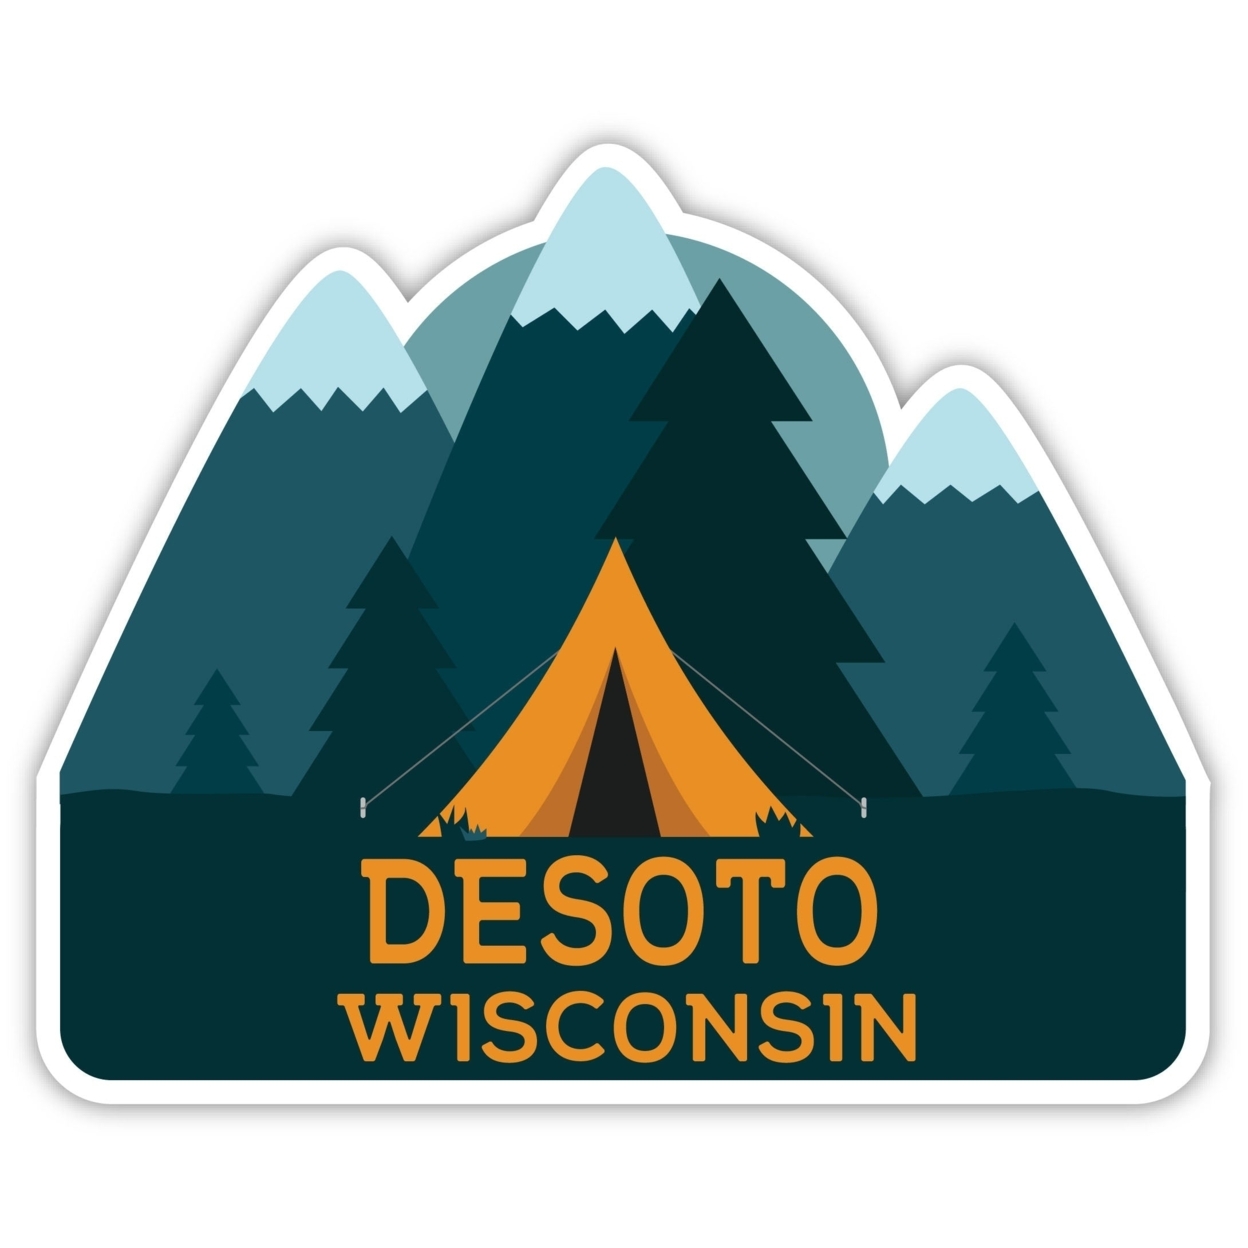 DeSoto Wisconsin Souvenir Decorative Stickers (Choose Theme And Size) - 4-Pack, 2-Inch, Tent